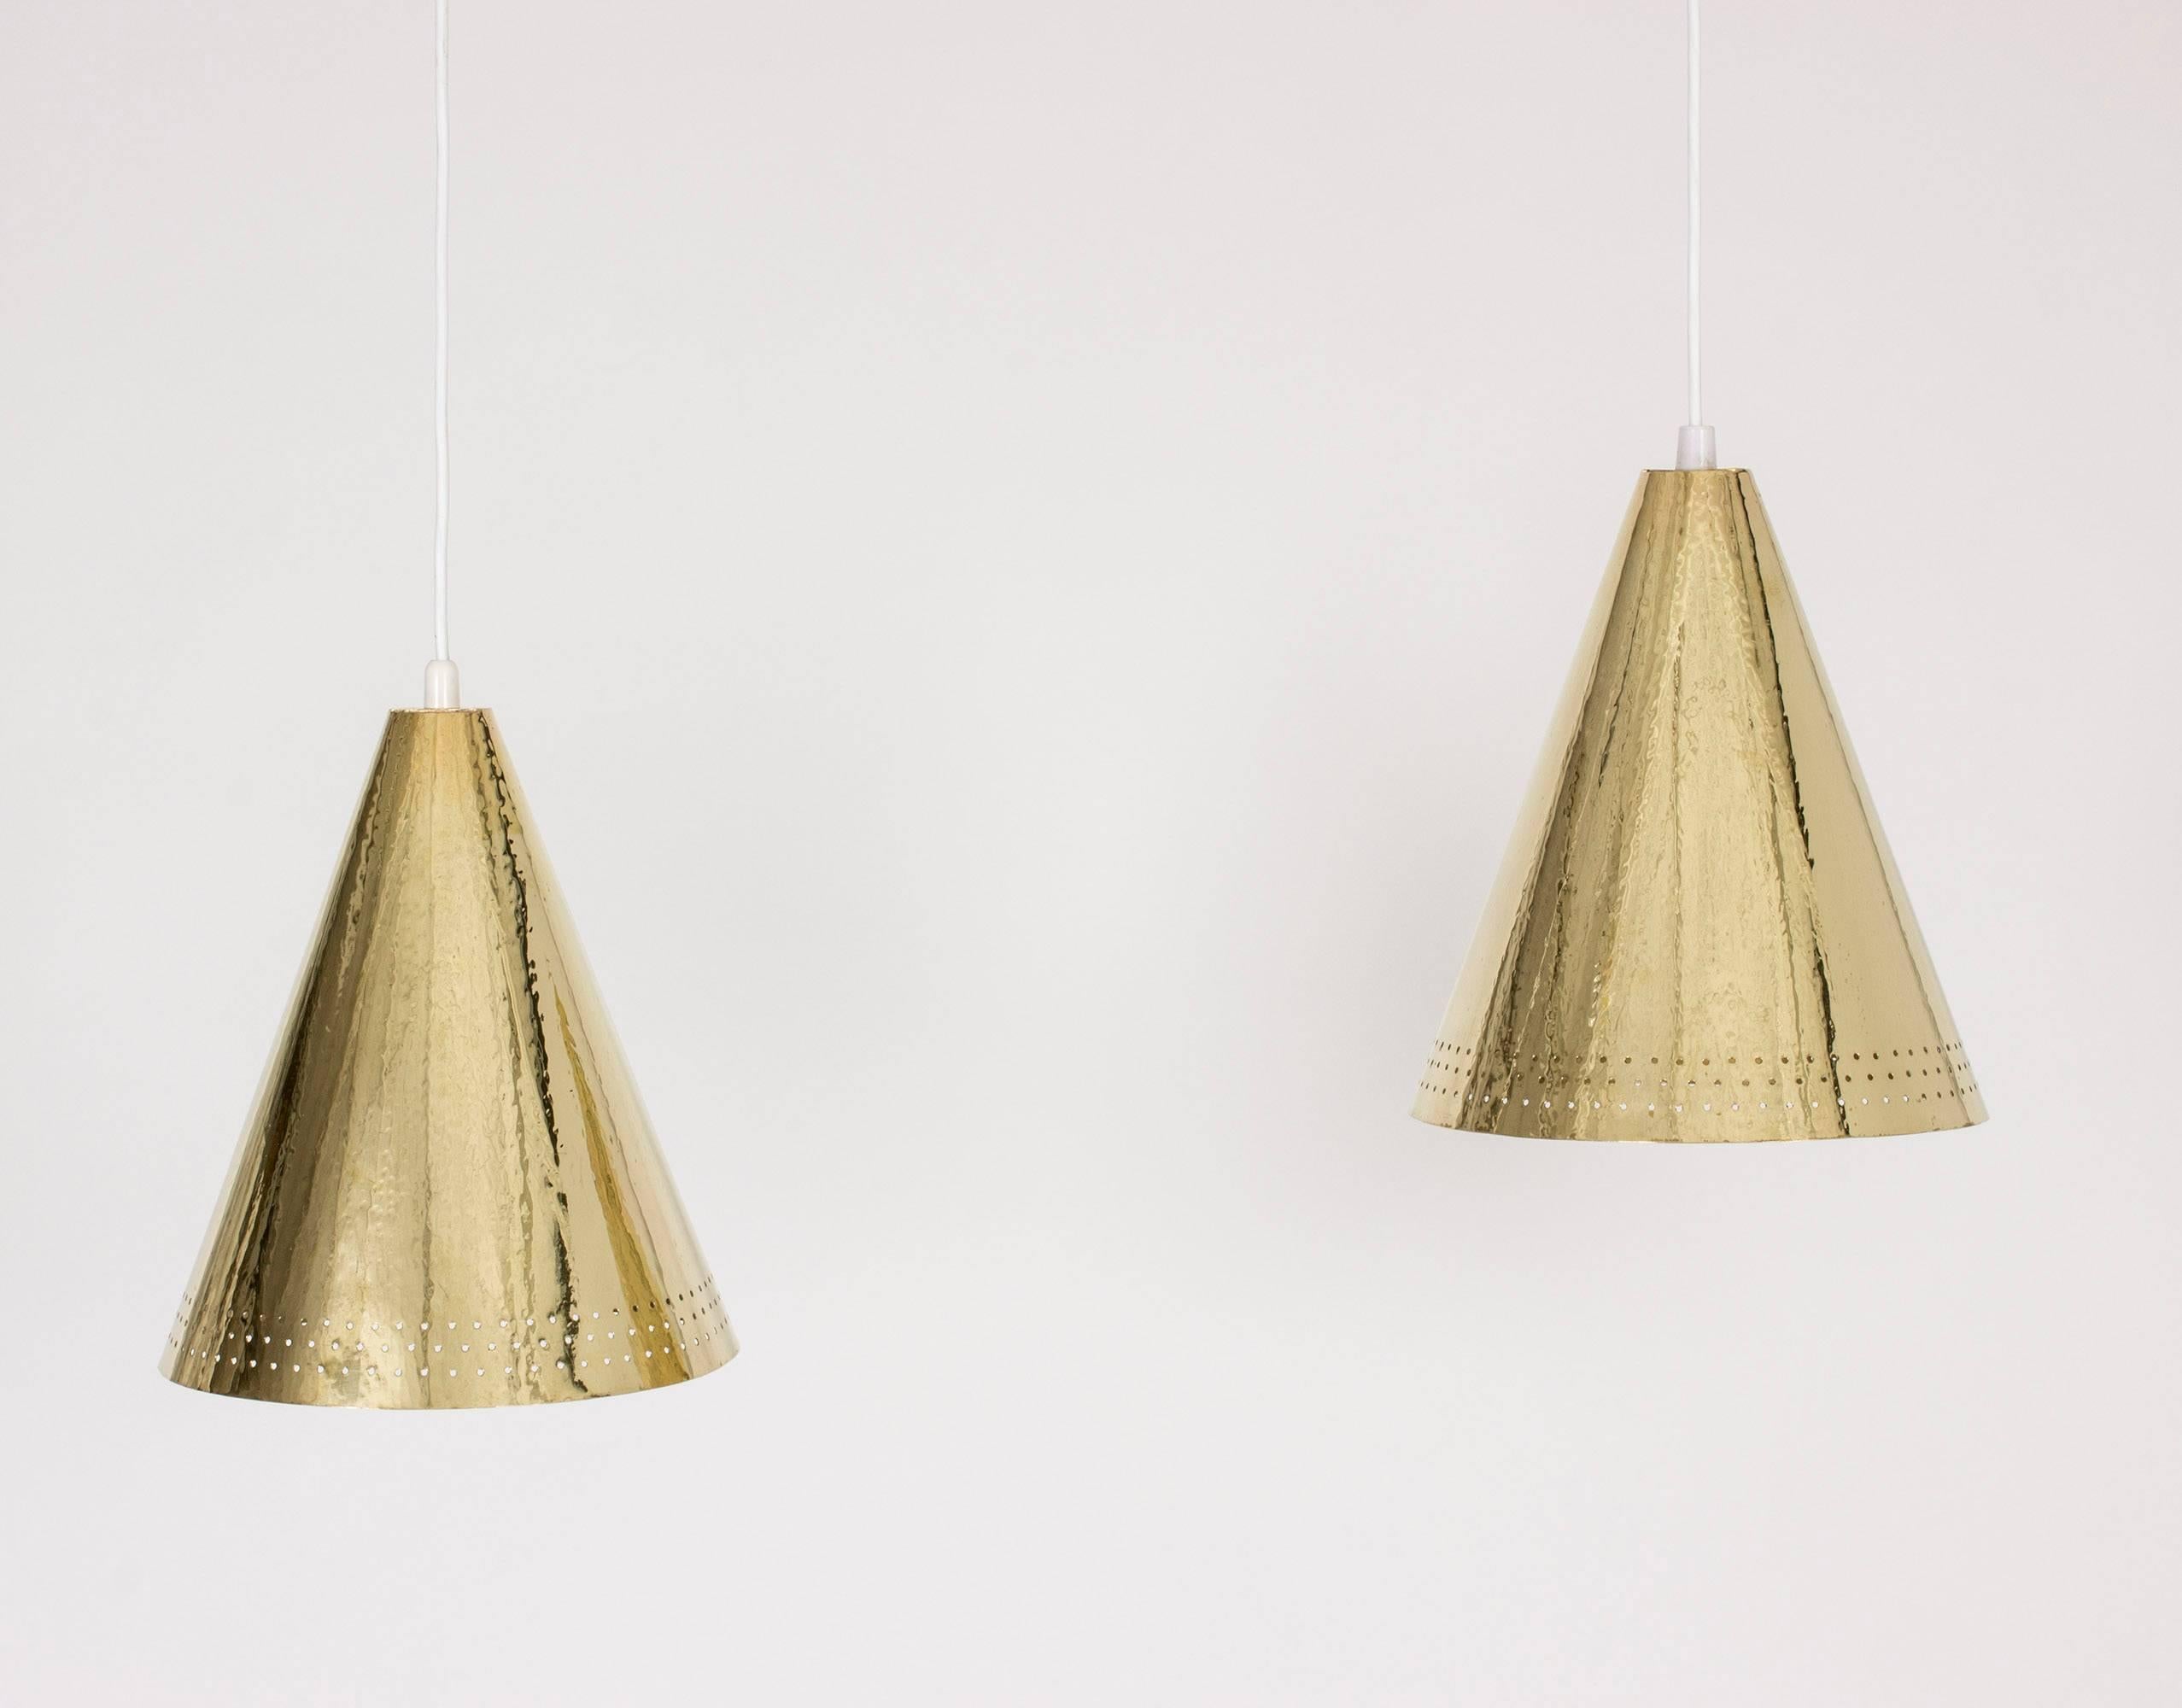 Pair of beautiful brass pendant lamps by Hans Holmström, with a hand-hammered finish that bring life and luxury to the simplistic silhouettes. The shades are perforated with a pattern of holes around the bottom edge.